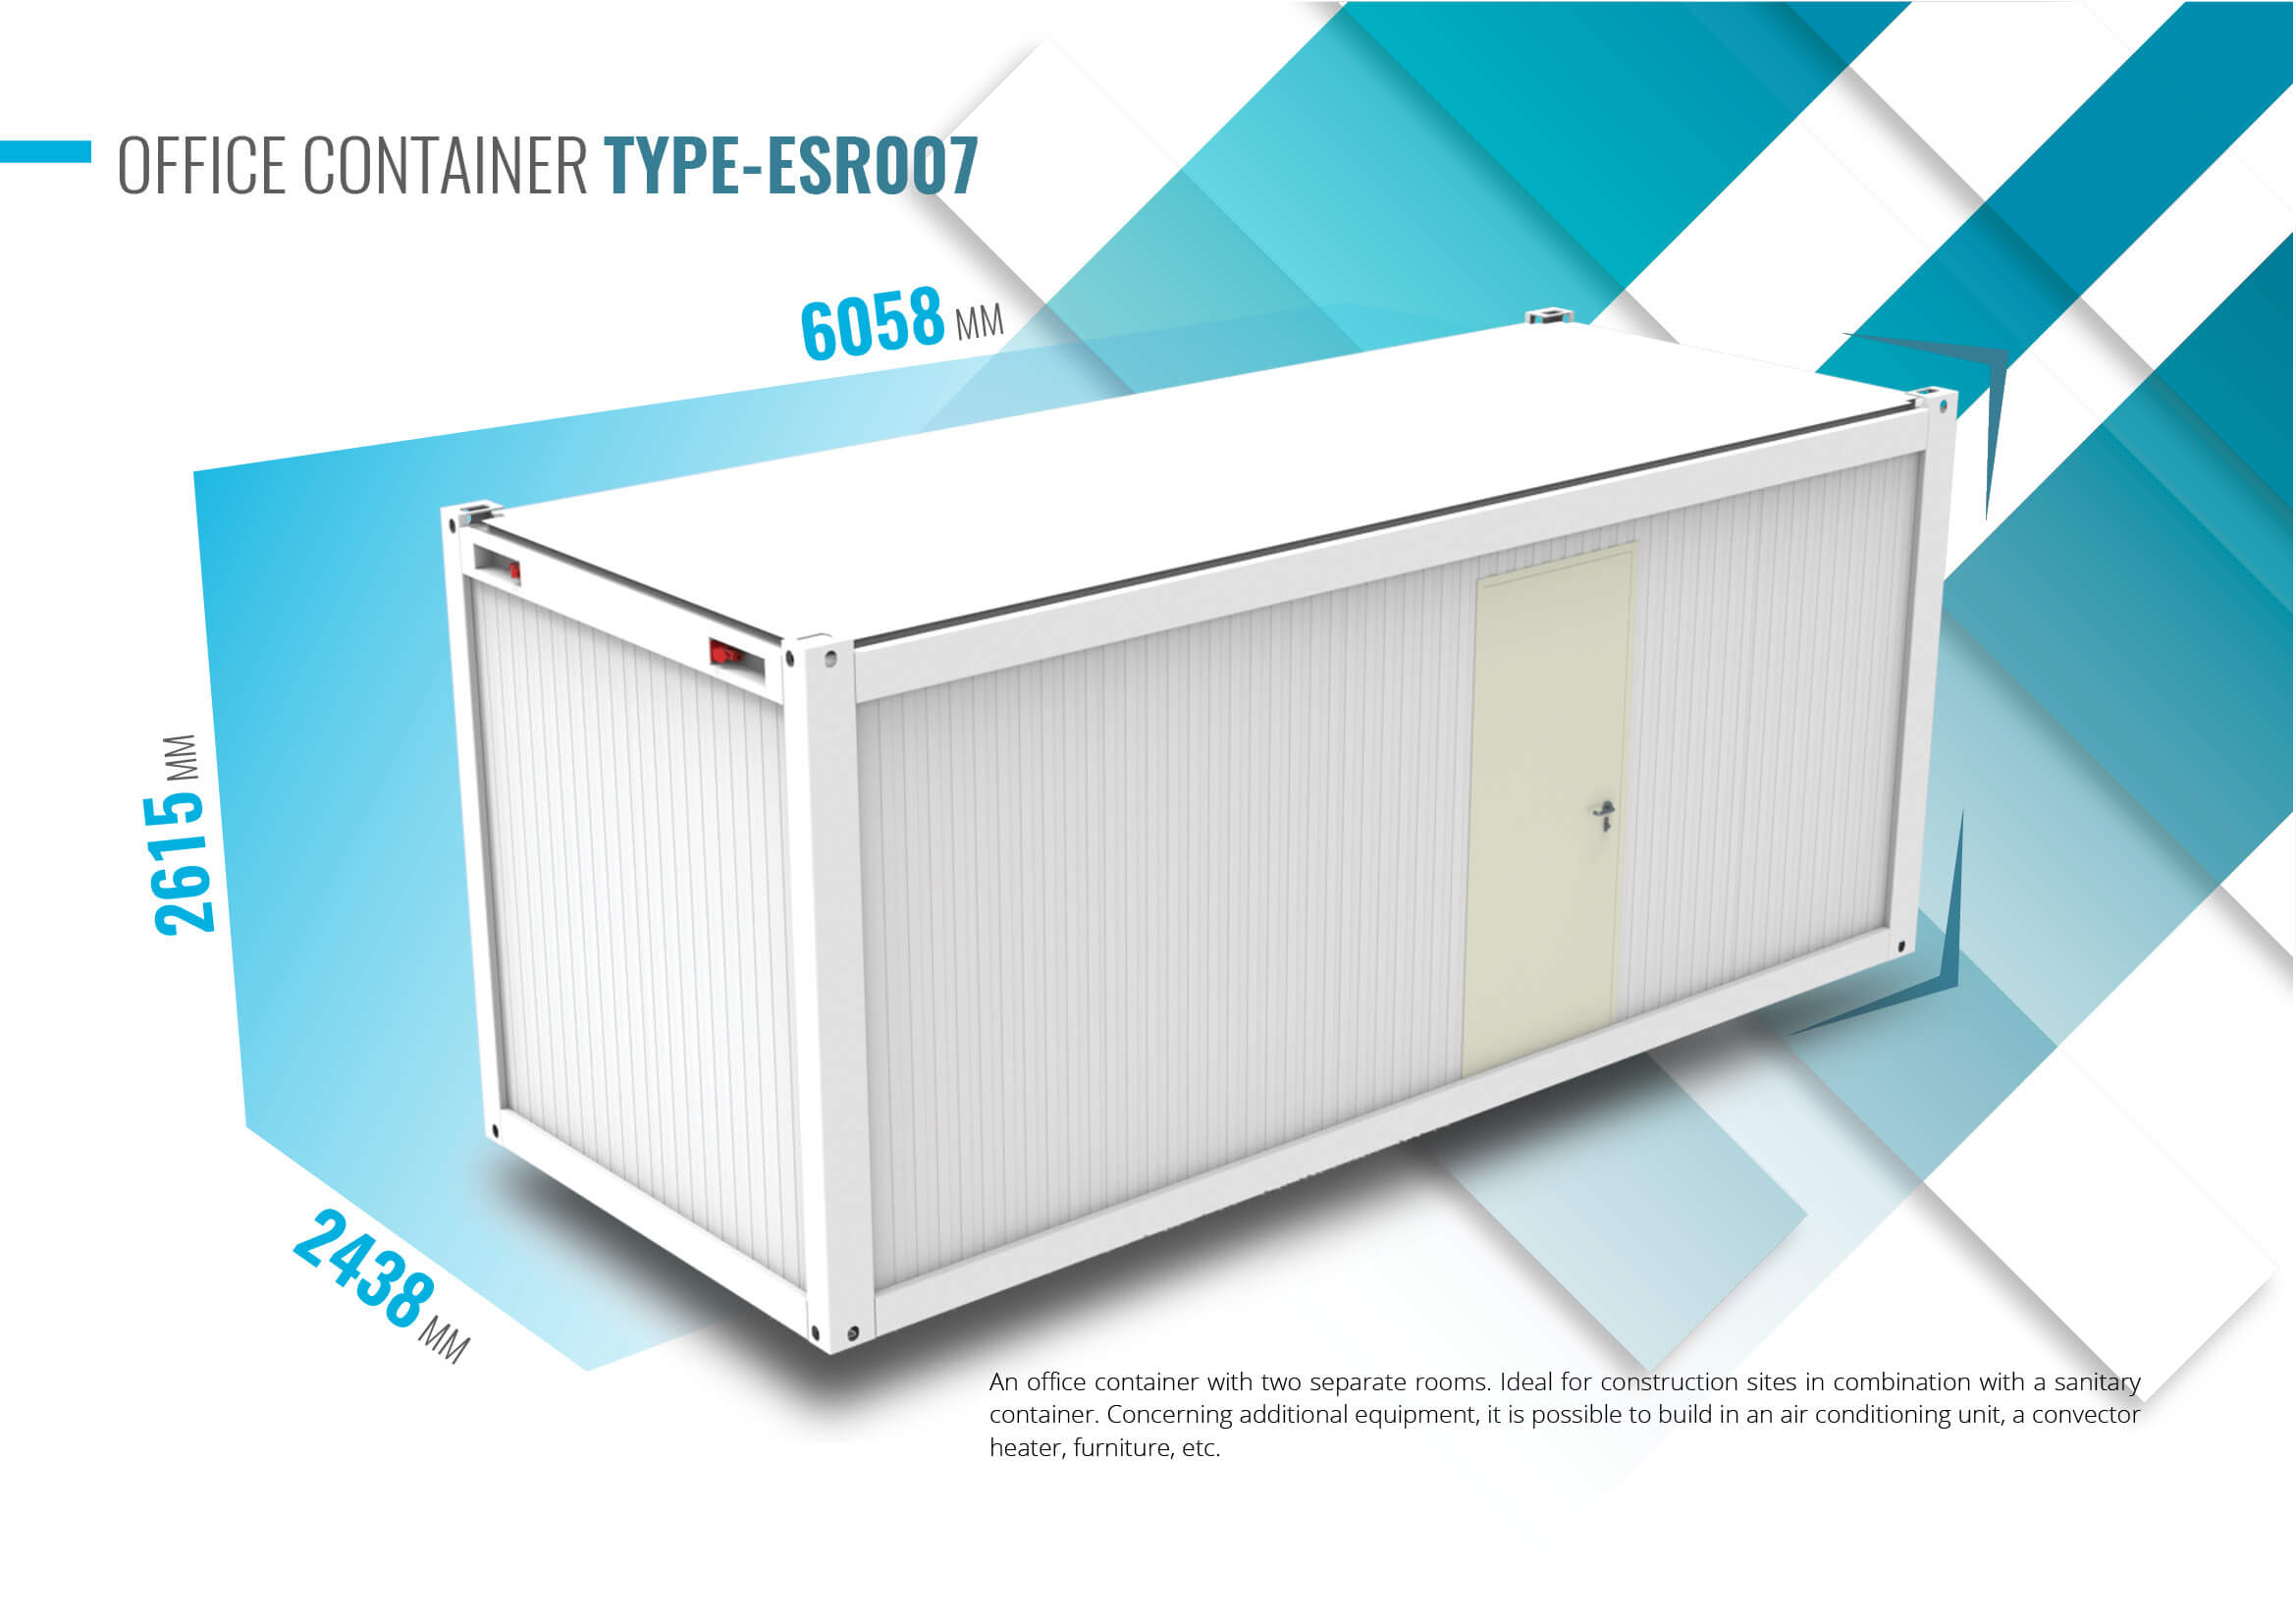 Elvaco MetPro Containers - Modular Systems